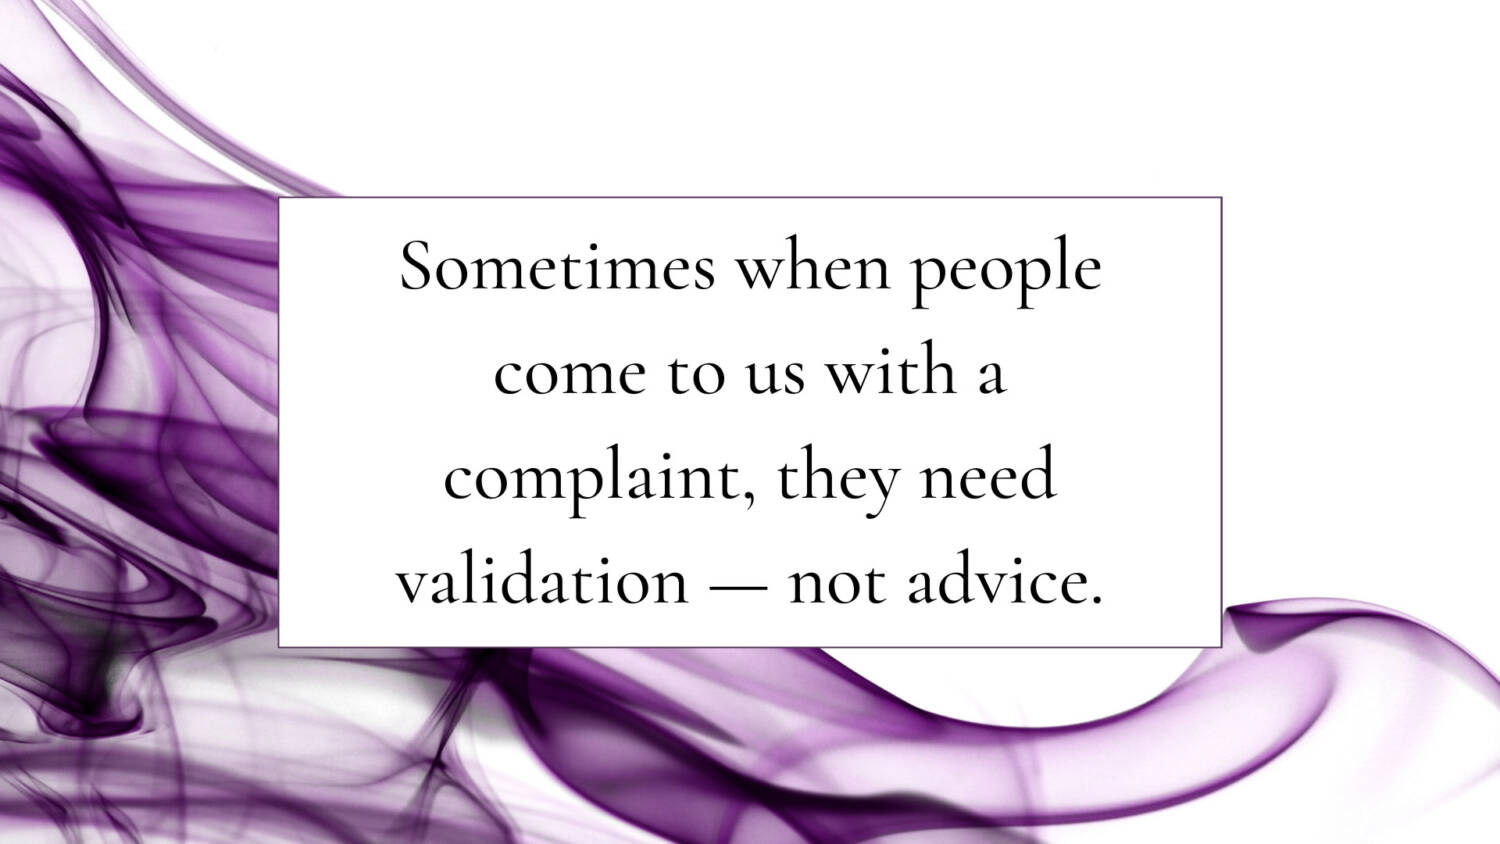 Sometimes when people come to us with a complaint, they need validation — not advice.